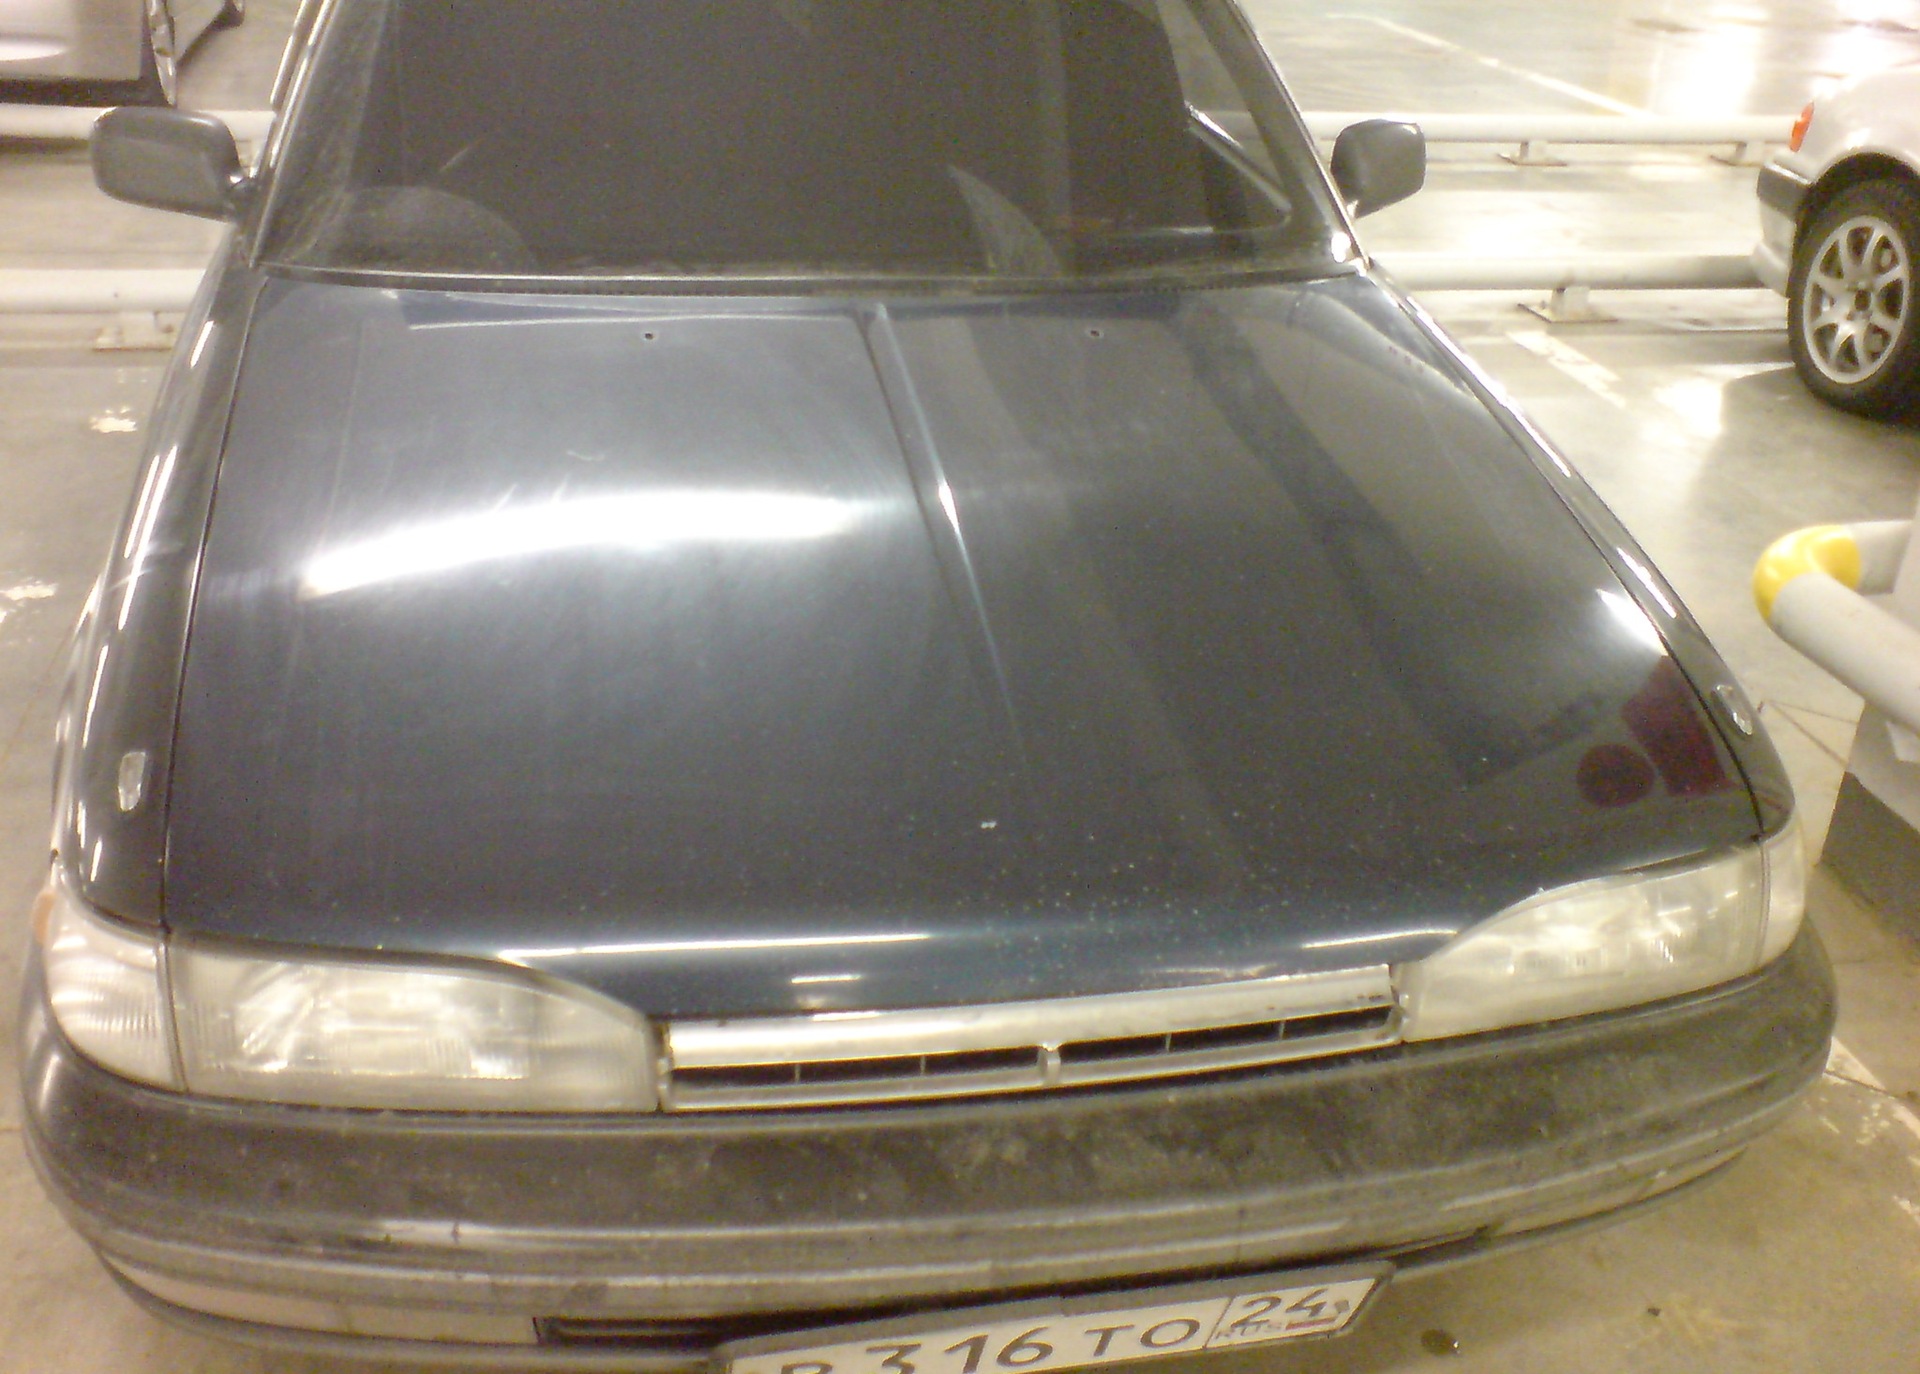 Tuning is declared open  - Toyota Carina 20 L 1991